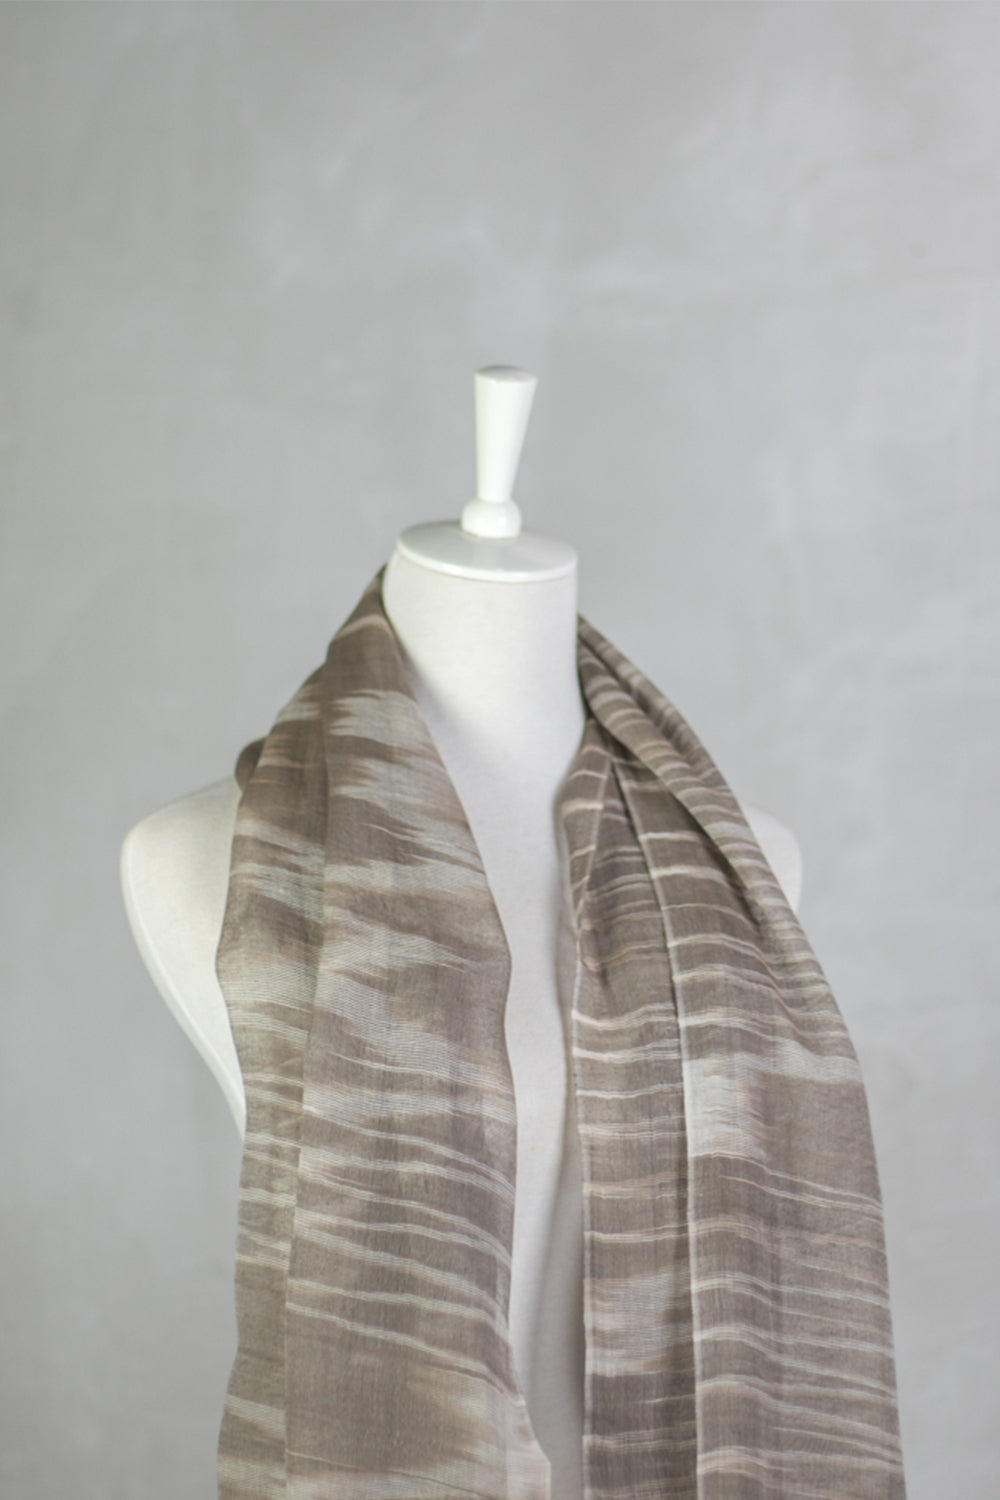 Artisan & Fox - Shawls - IKAT Scarf in Olive Grey - Made in Cambodia